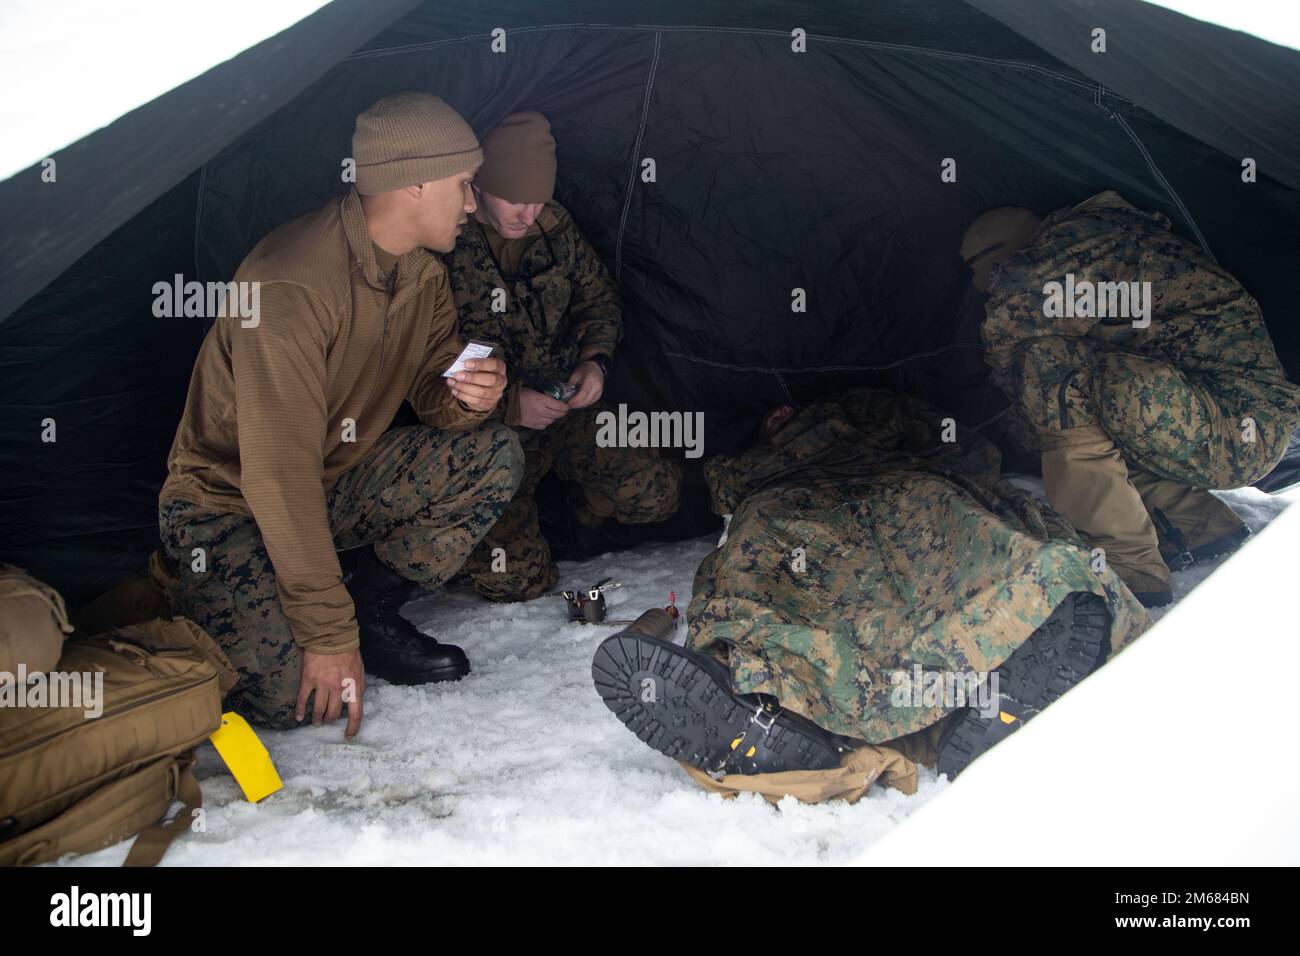 U.S. Marines, with the 22nd Marine Expeditionary Unit, wait for further medical support during casualty evacuation drills, in Setermoen, Norway, April 15, 2022. U.S. Marines and Sailors are training in Norway to strengthen relationships between NATO and allied forces. Stock Photo